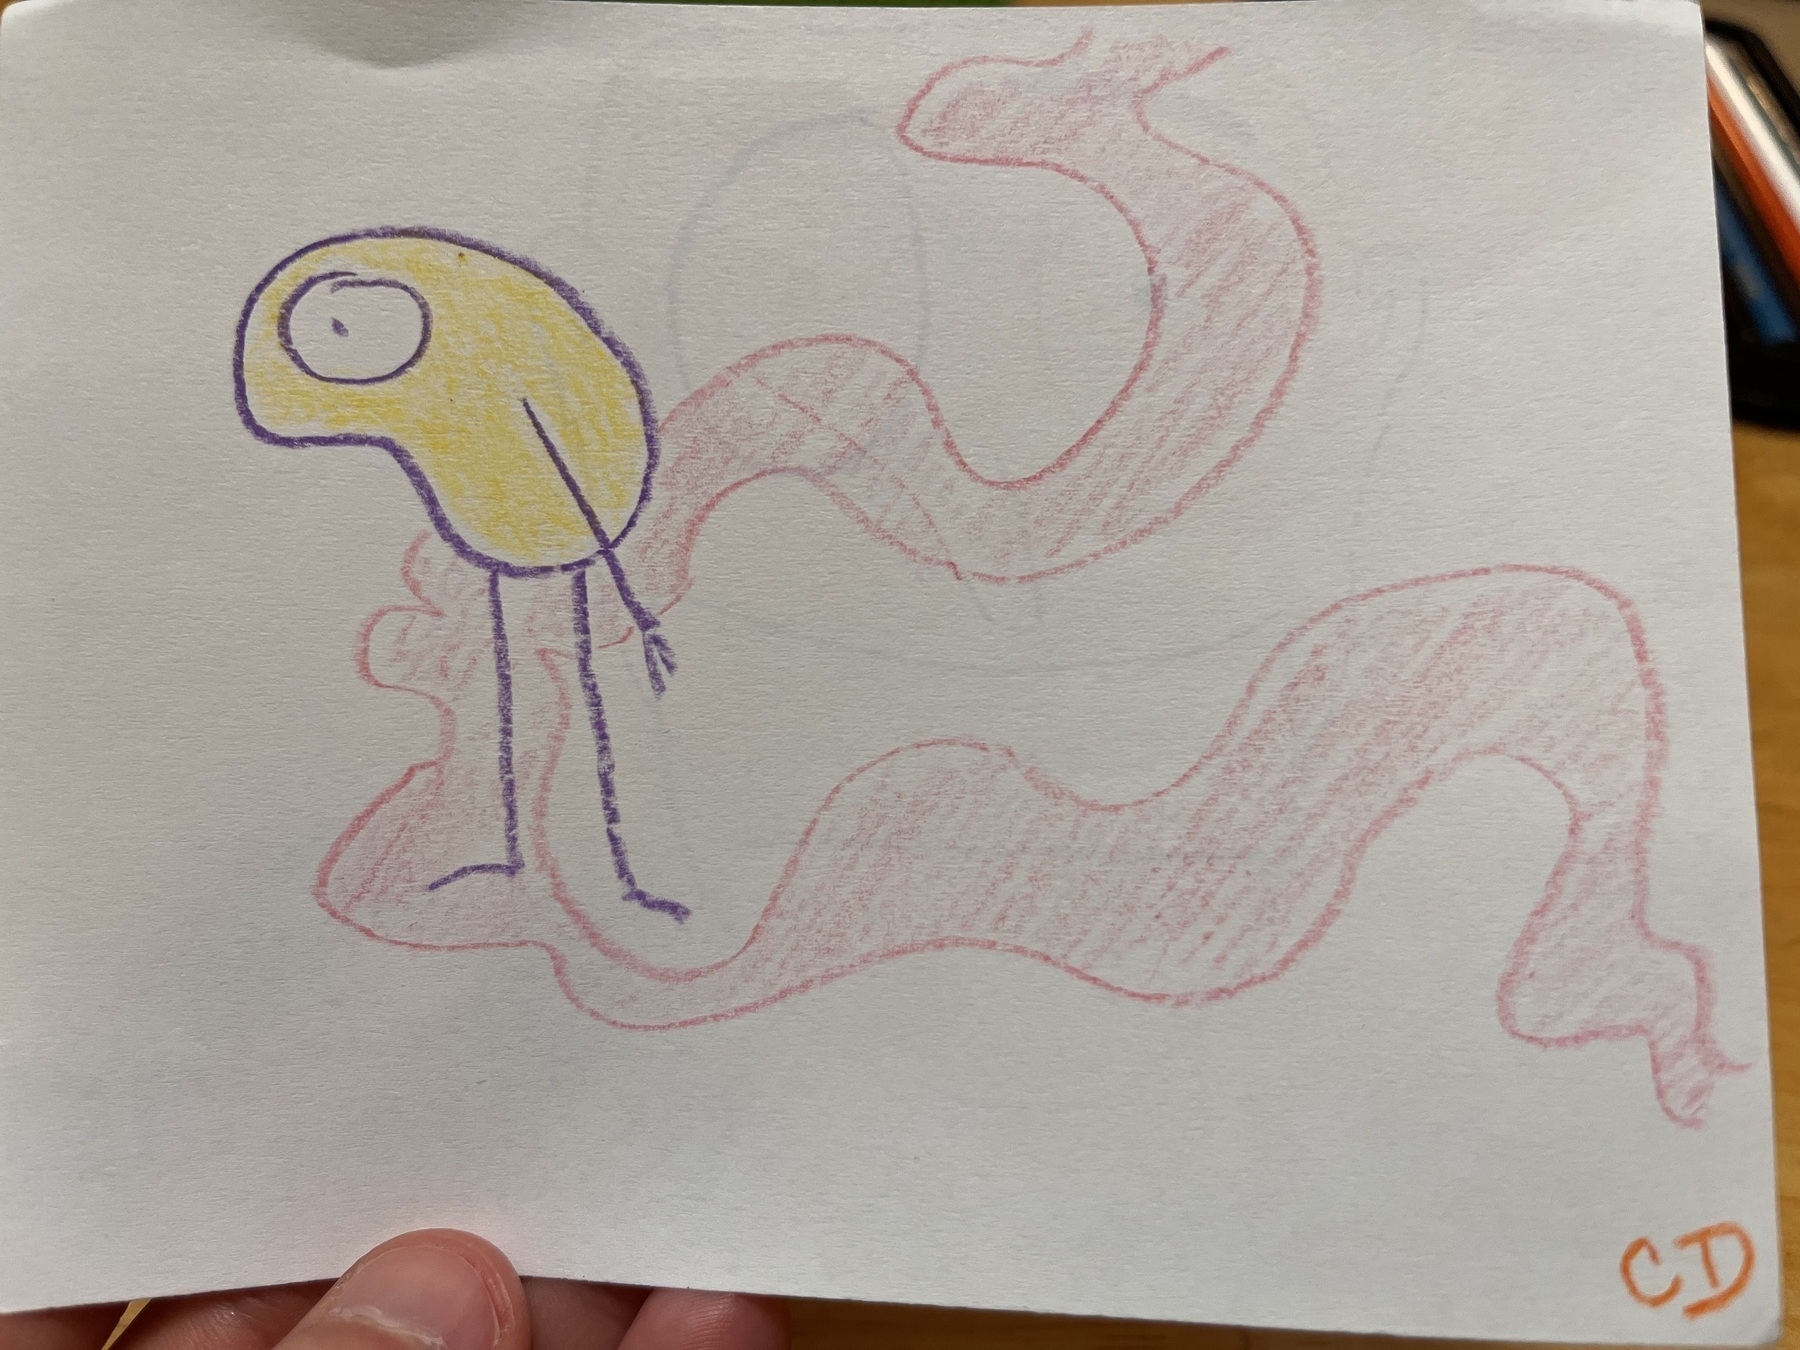 A purple lined bean shape with a big eye and stick arms and legs. It stares off the page. There’s a pink swirl around it. 